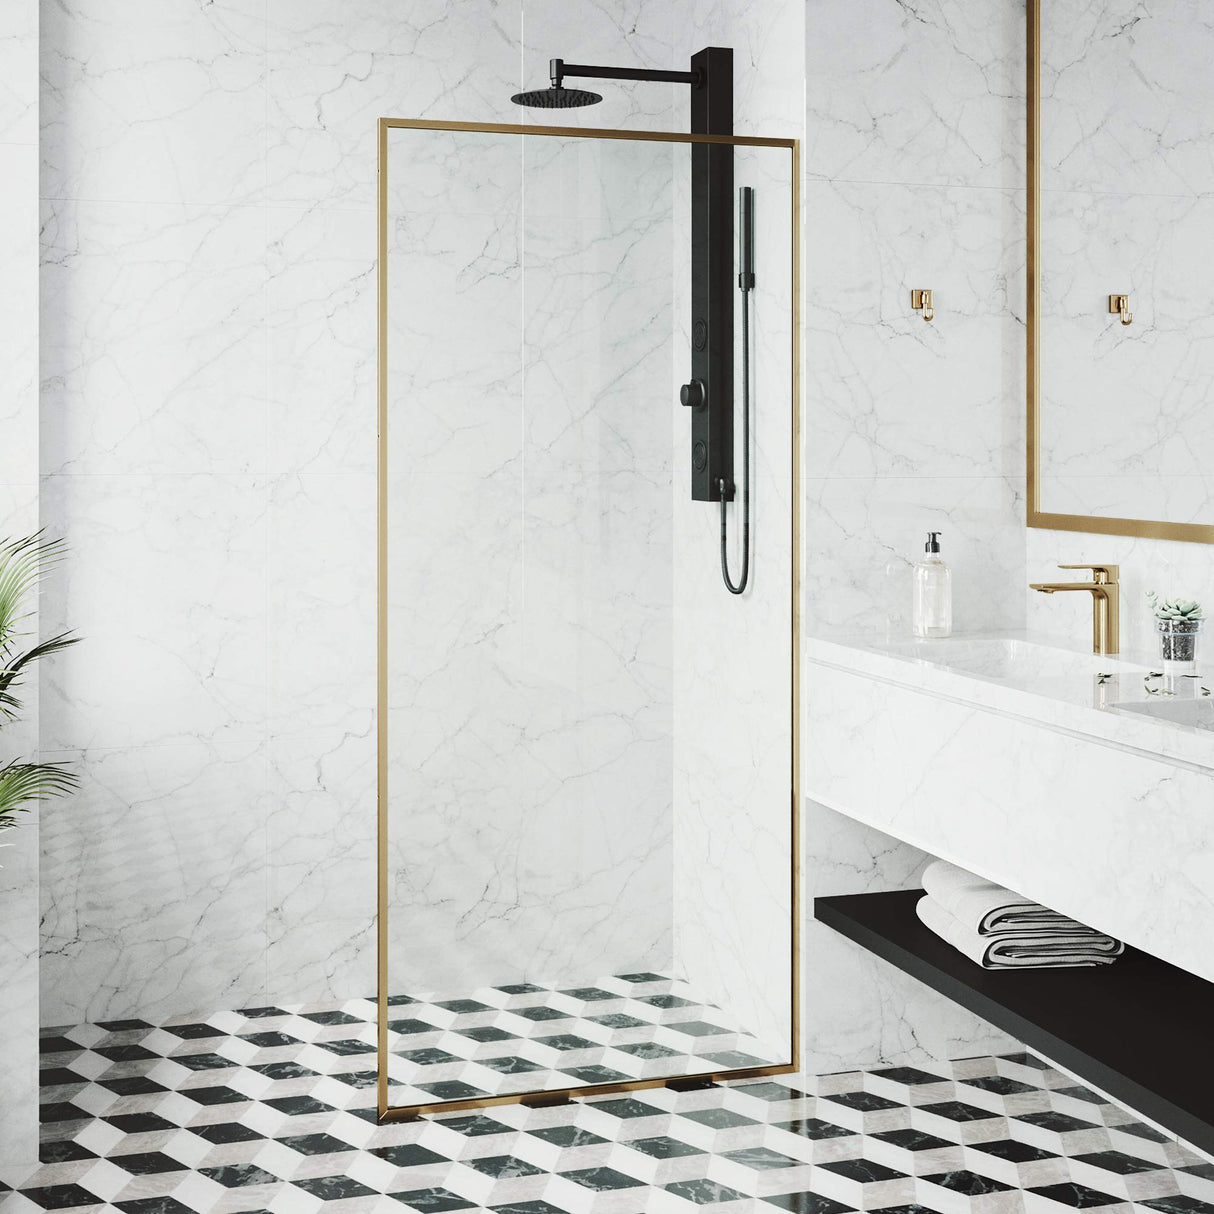 VIGO 34" W x 74" H Meridian Framed Fixed Rectangle Shower Screen with Clear Tempered Glass, Door Handle and Stainless Steel Hardware in Matte Brushed Gold-VG6077MGCL3474